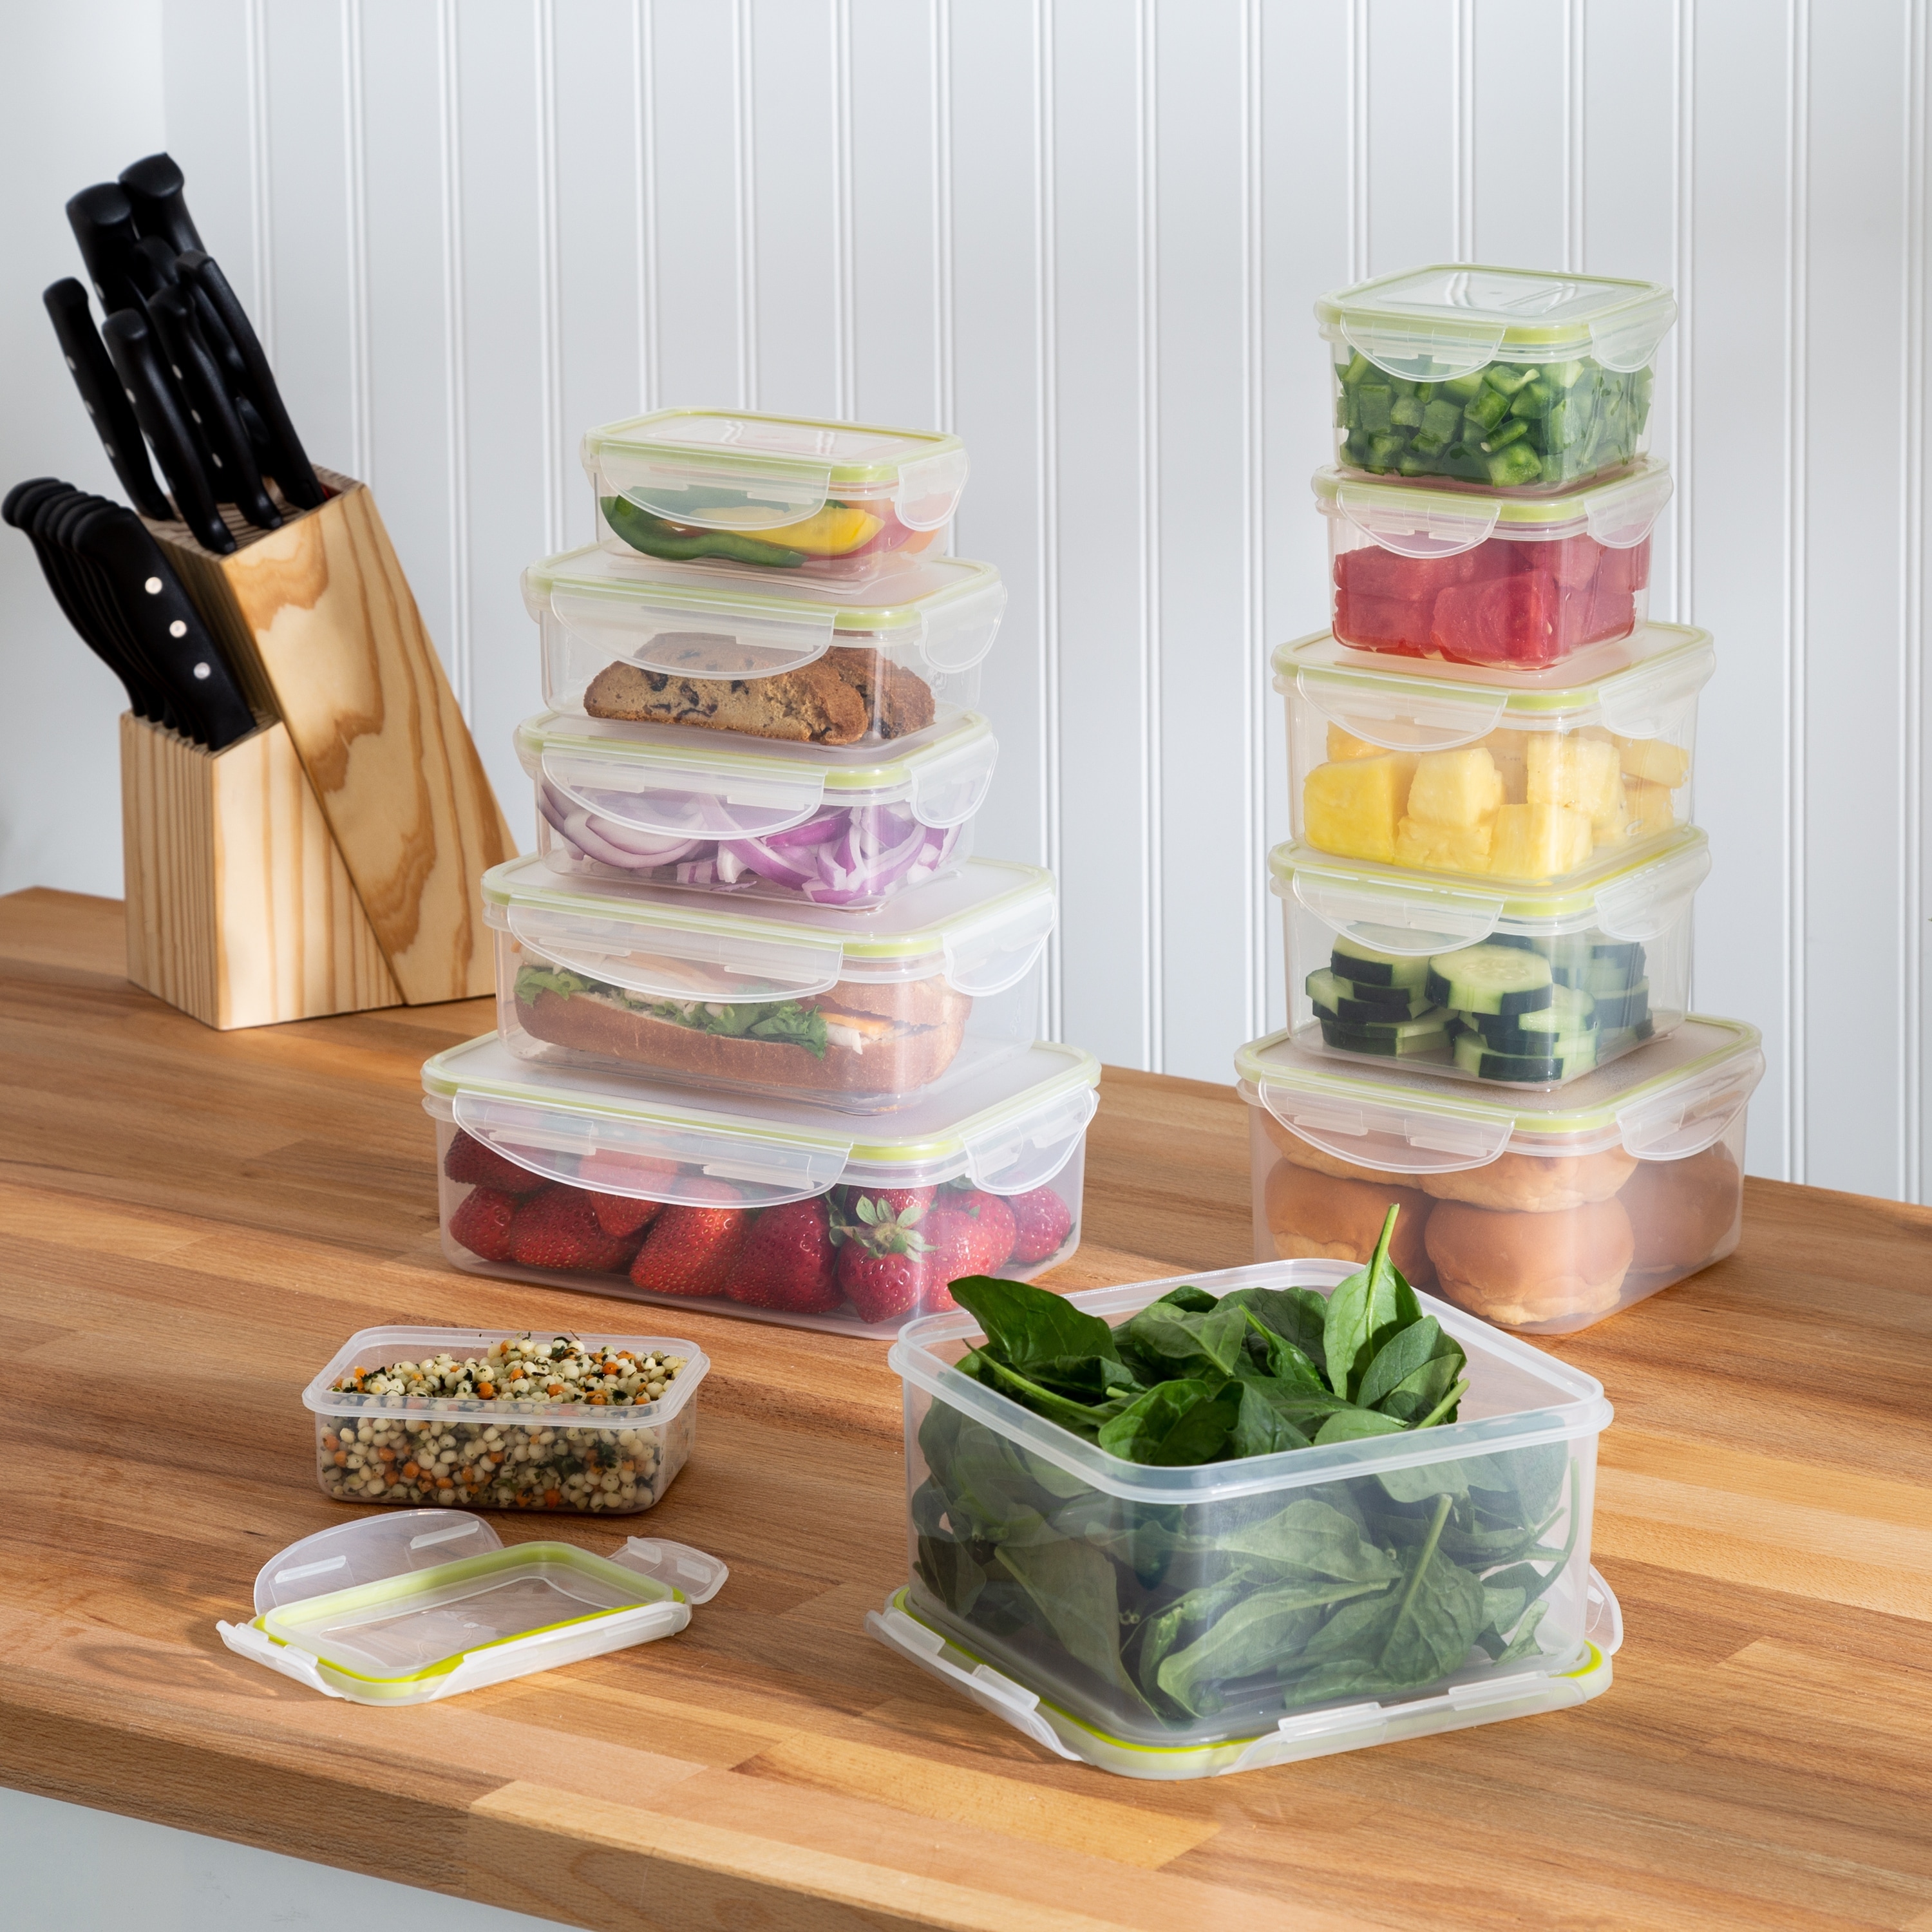 https://ak1.ostkcdn.com/images/products/is/images/direct/f5a1b31fa33a0213ef52bd882e3cc9cf93ad49bb/Clear-Plastic-Snap-Lock-Food-Storage-Set-%2824-Piece%29.jpg